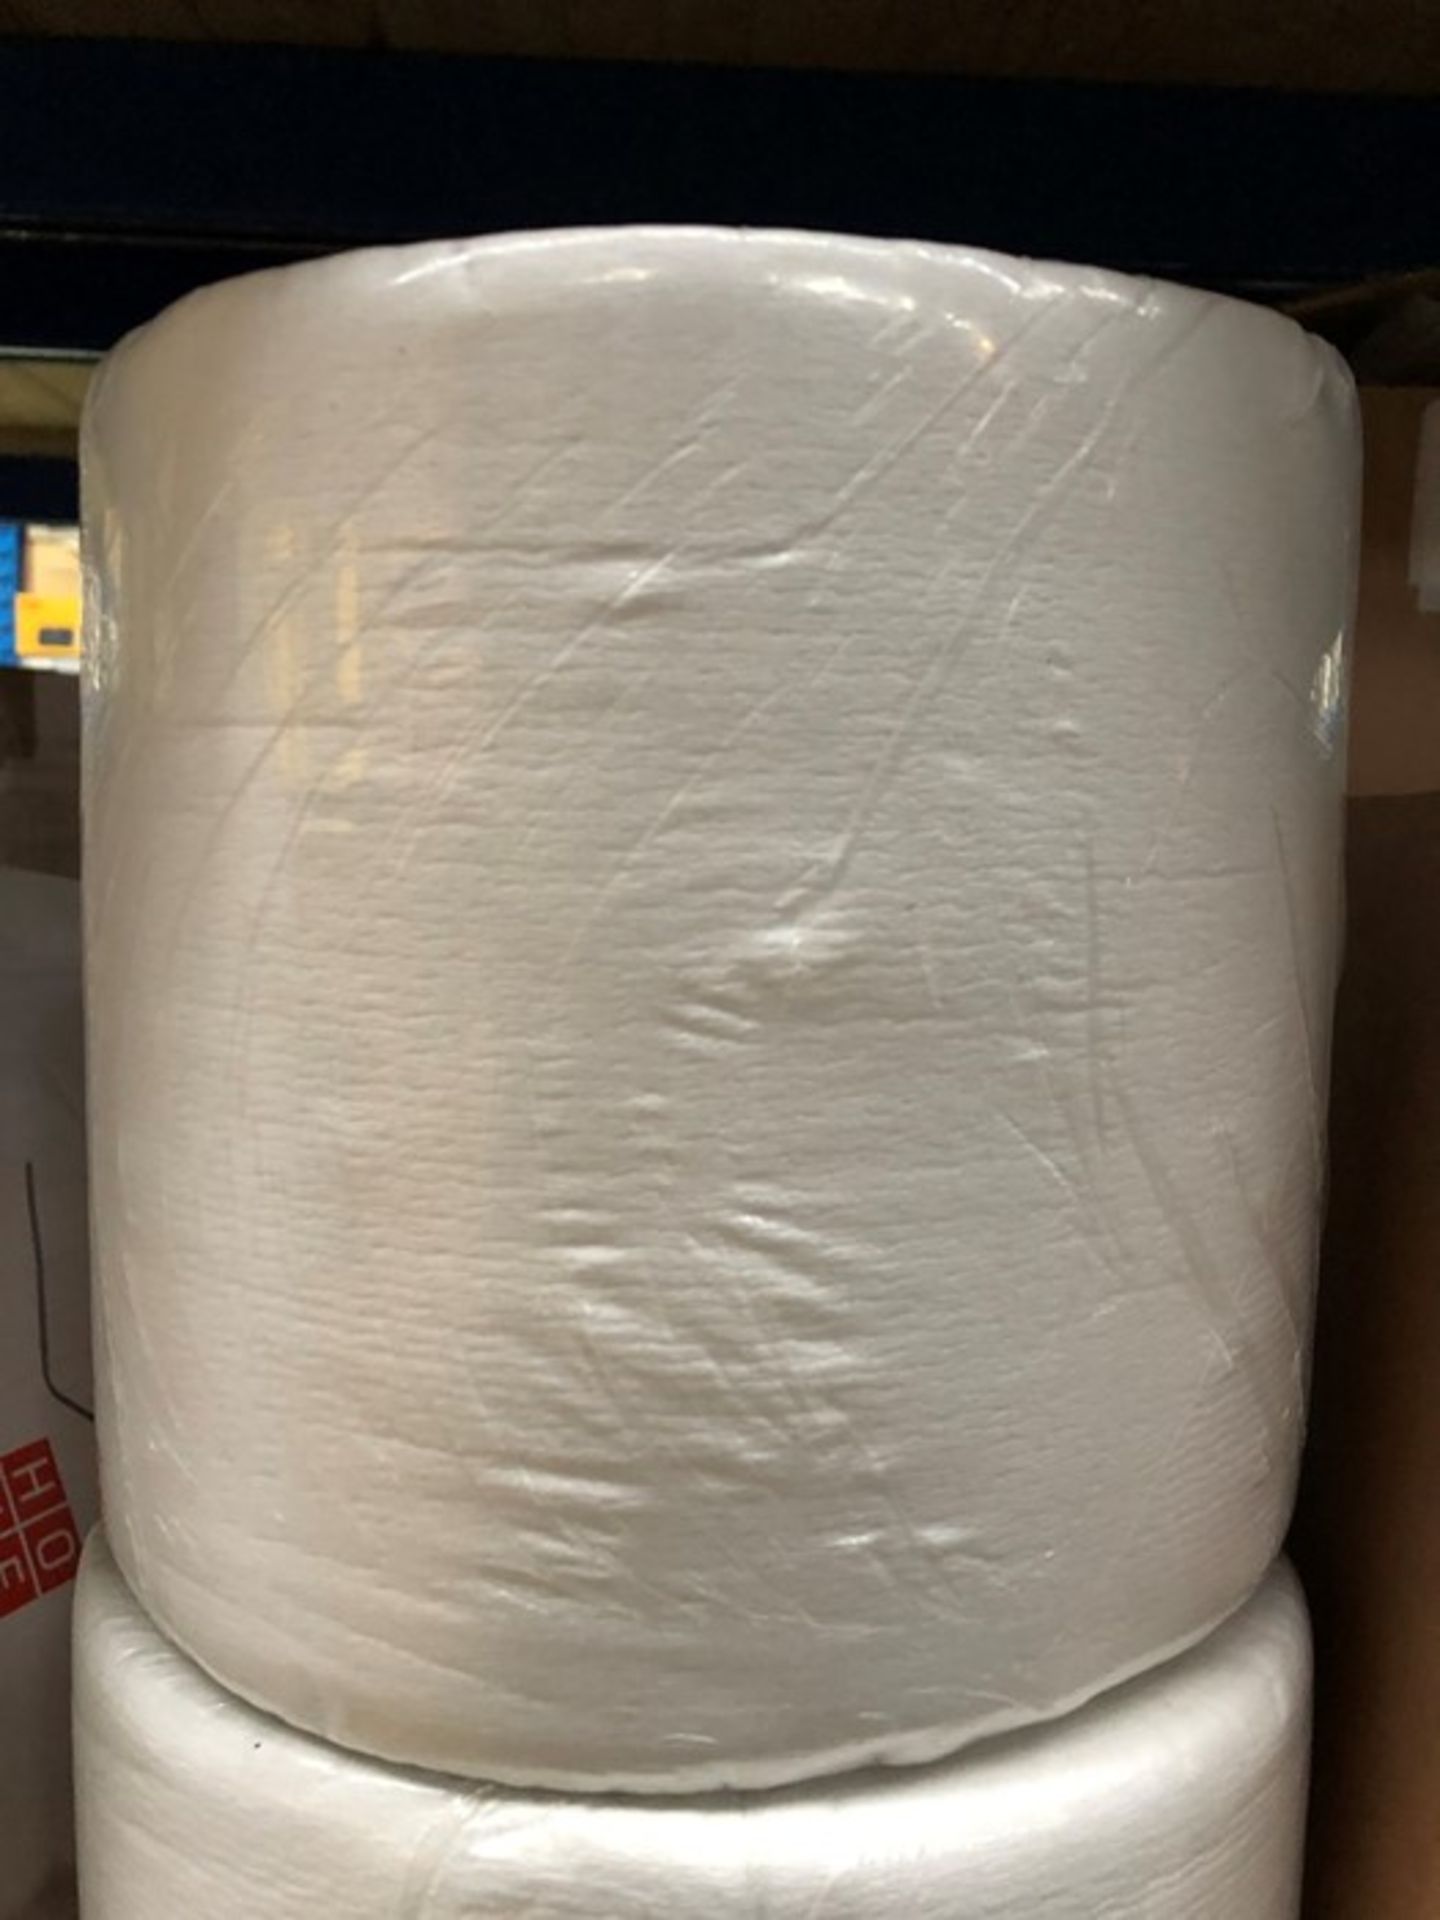 1 SEALED VERY LARGE TOILET ROLL/PAPER TOWEL (PUBLIC VIEWING AVAILABLE) - Image 2 of 2